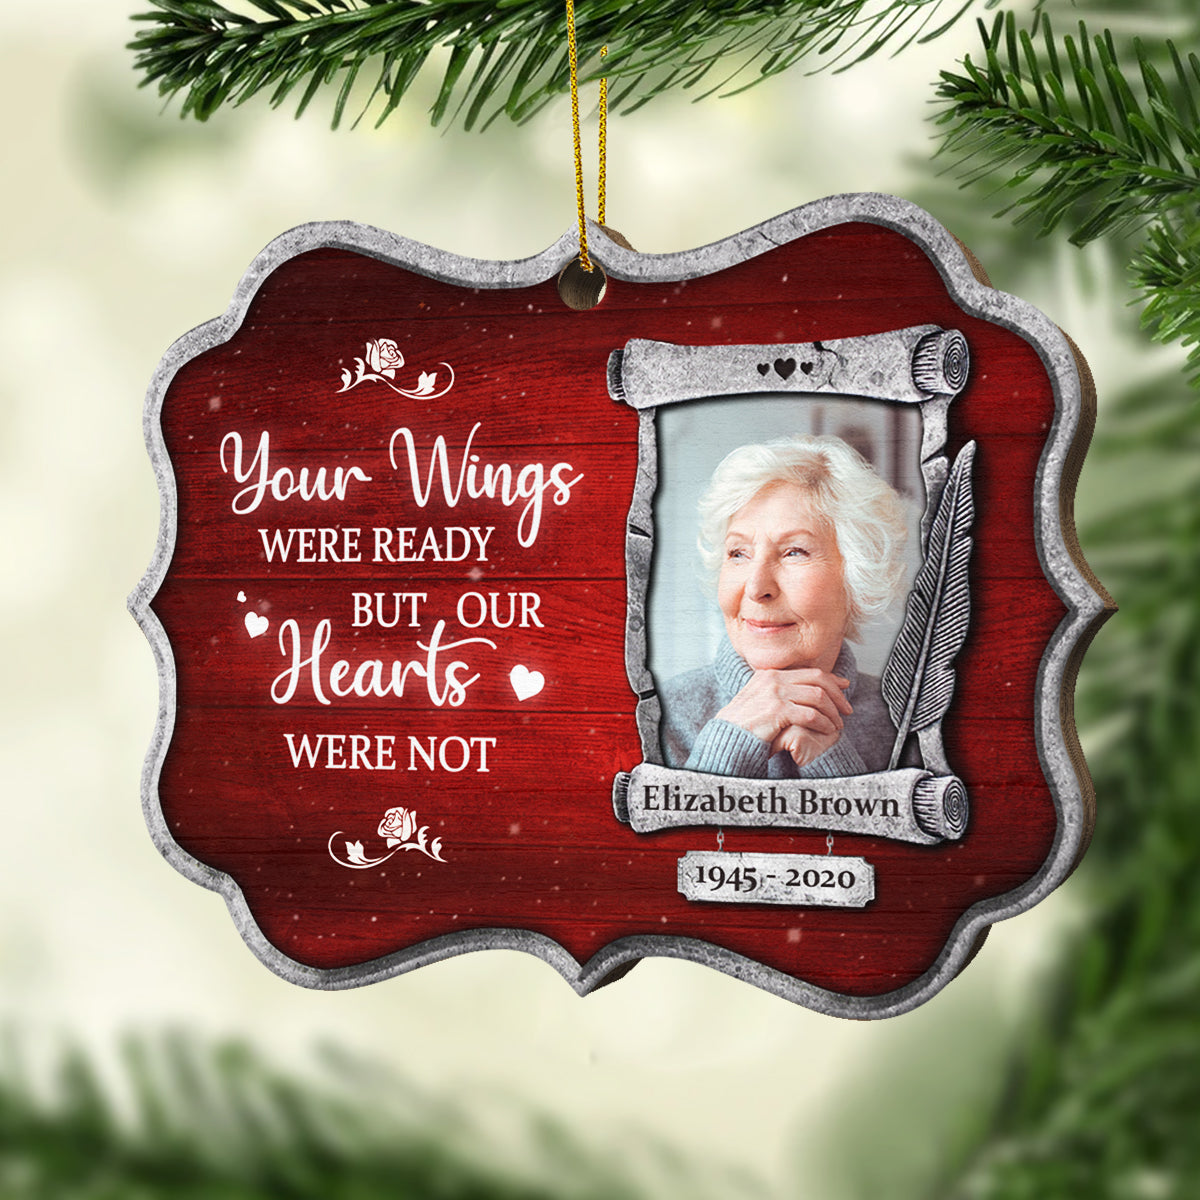 There Is A Little Bit Of Heaven In Our Home - Personalized Shaped Ornament